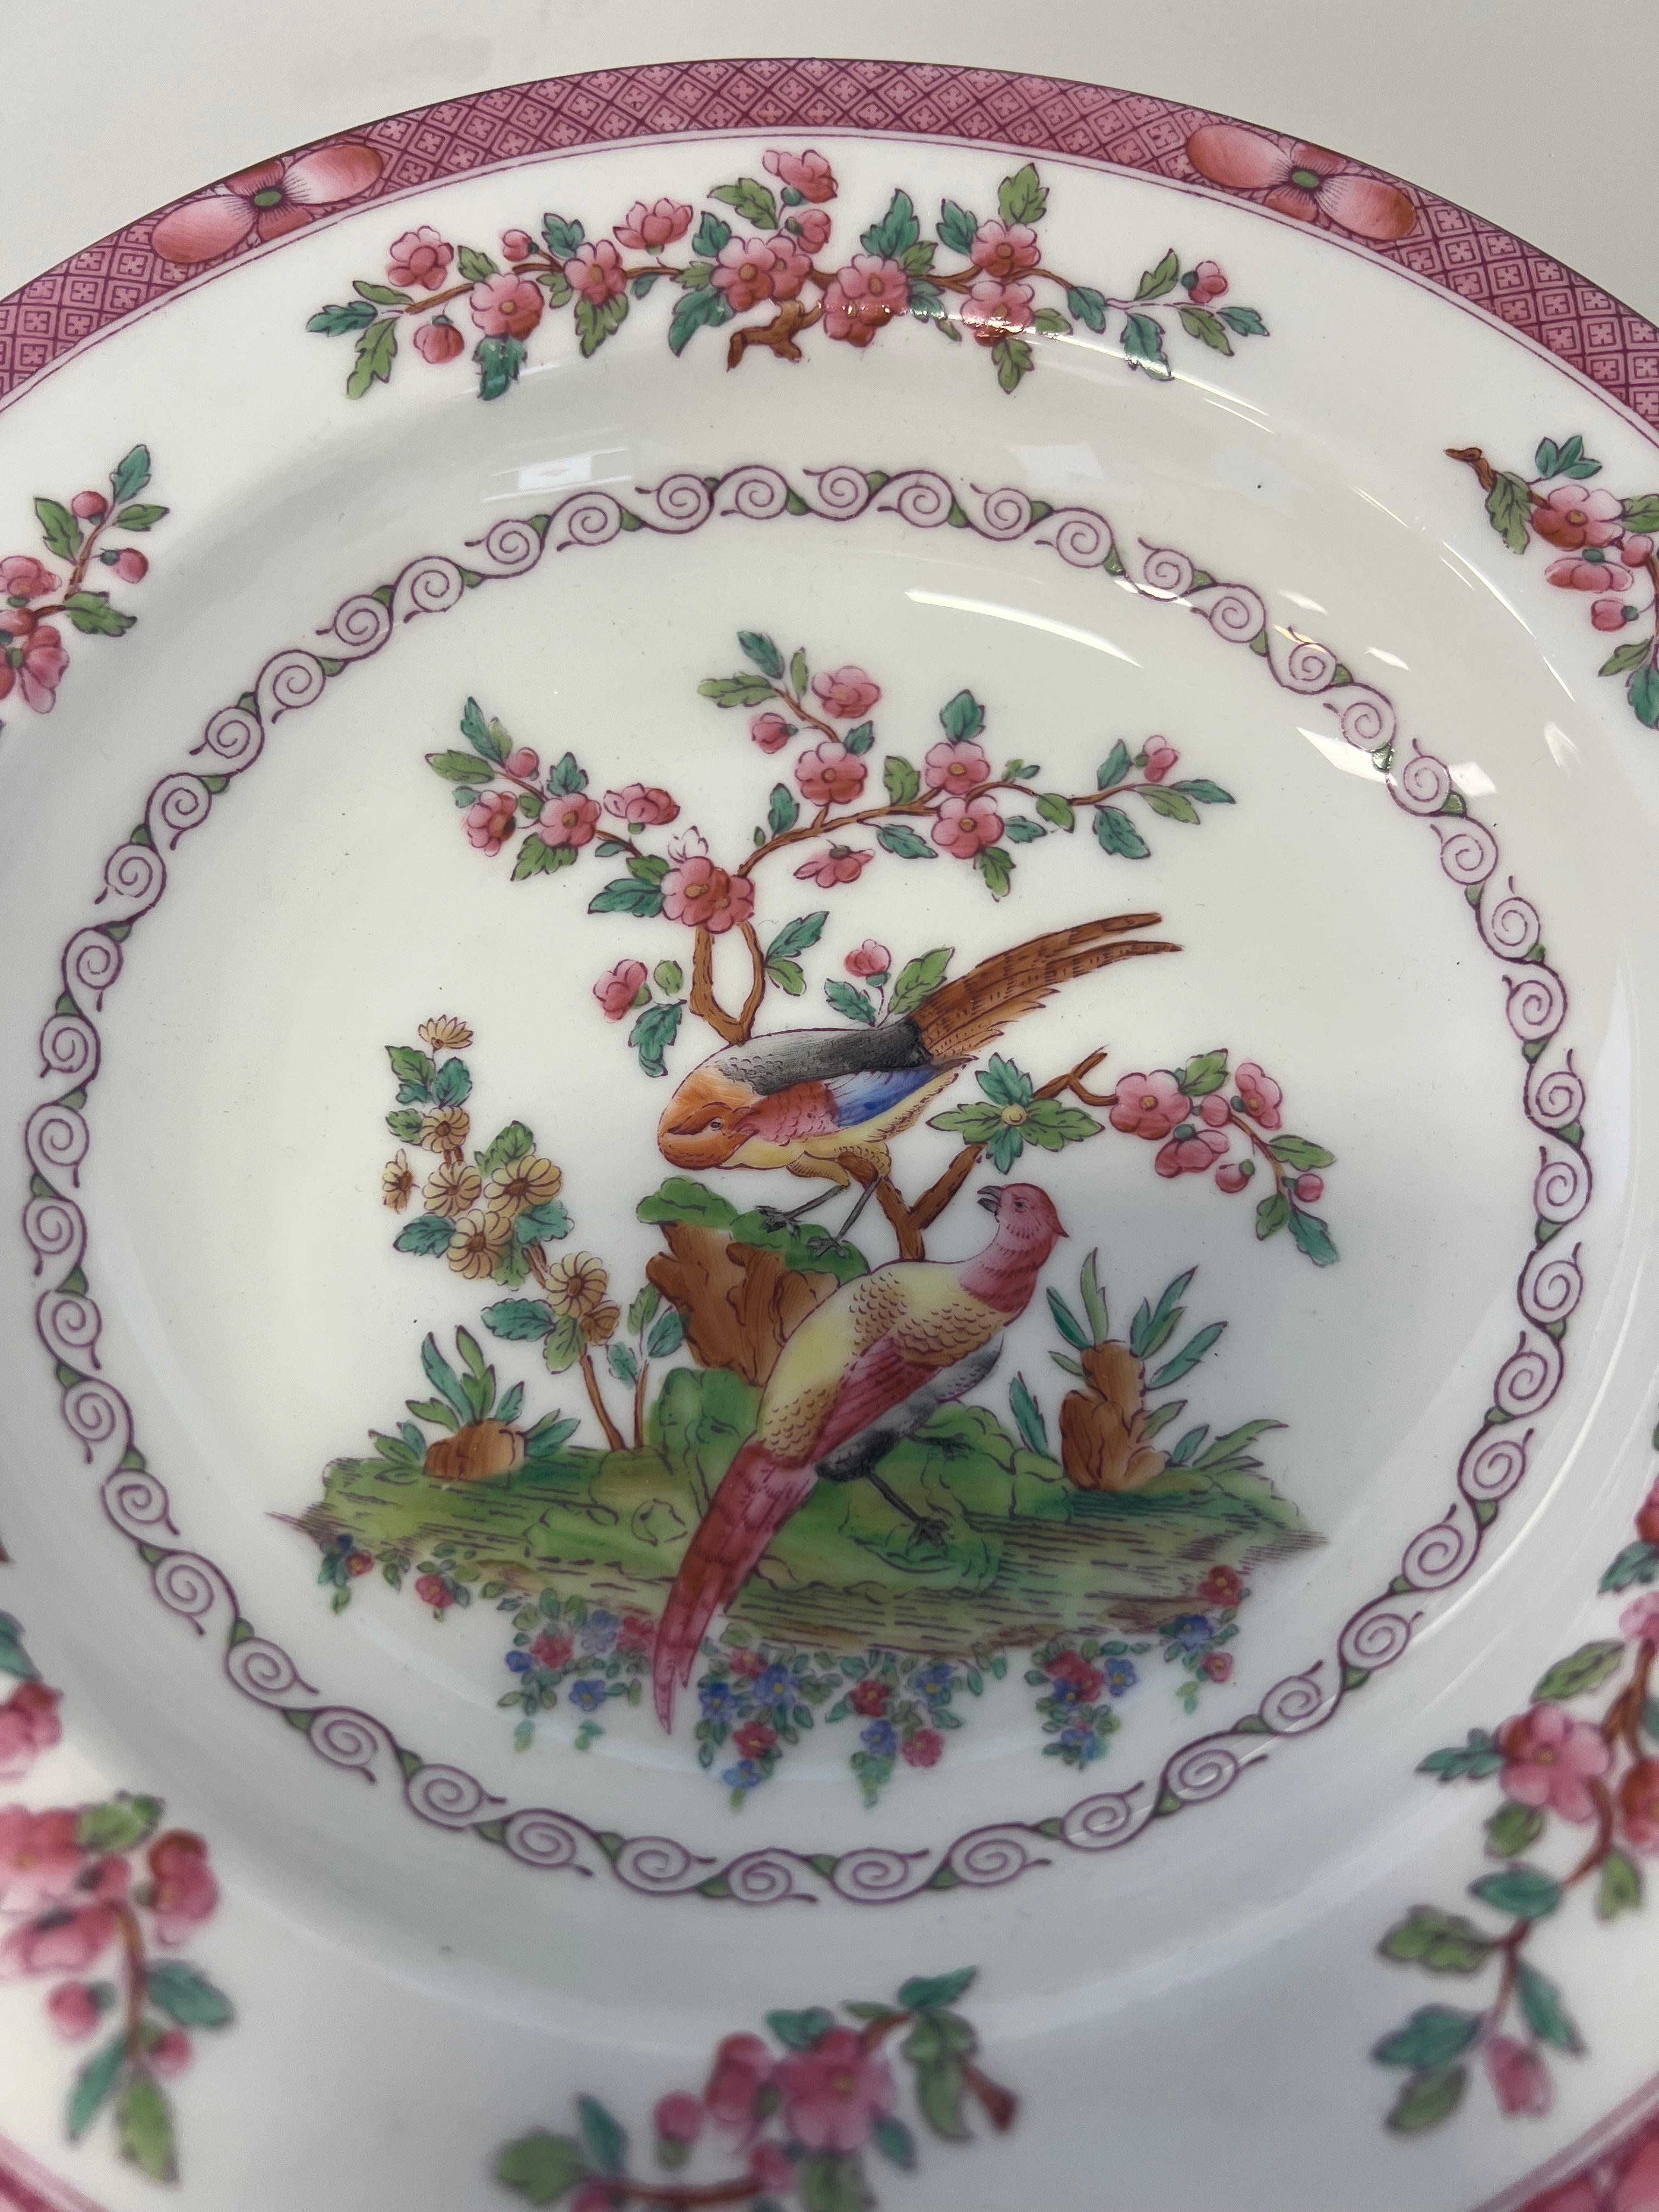 20th Century English Royal Worcester Porcelain Plated Retailed by Tiffany & Co, Circa 1900 For Sale